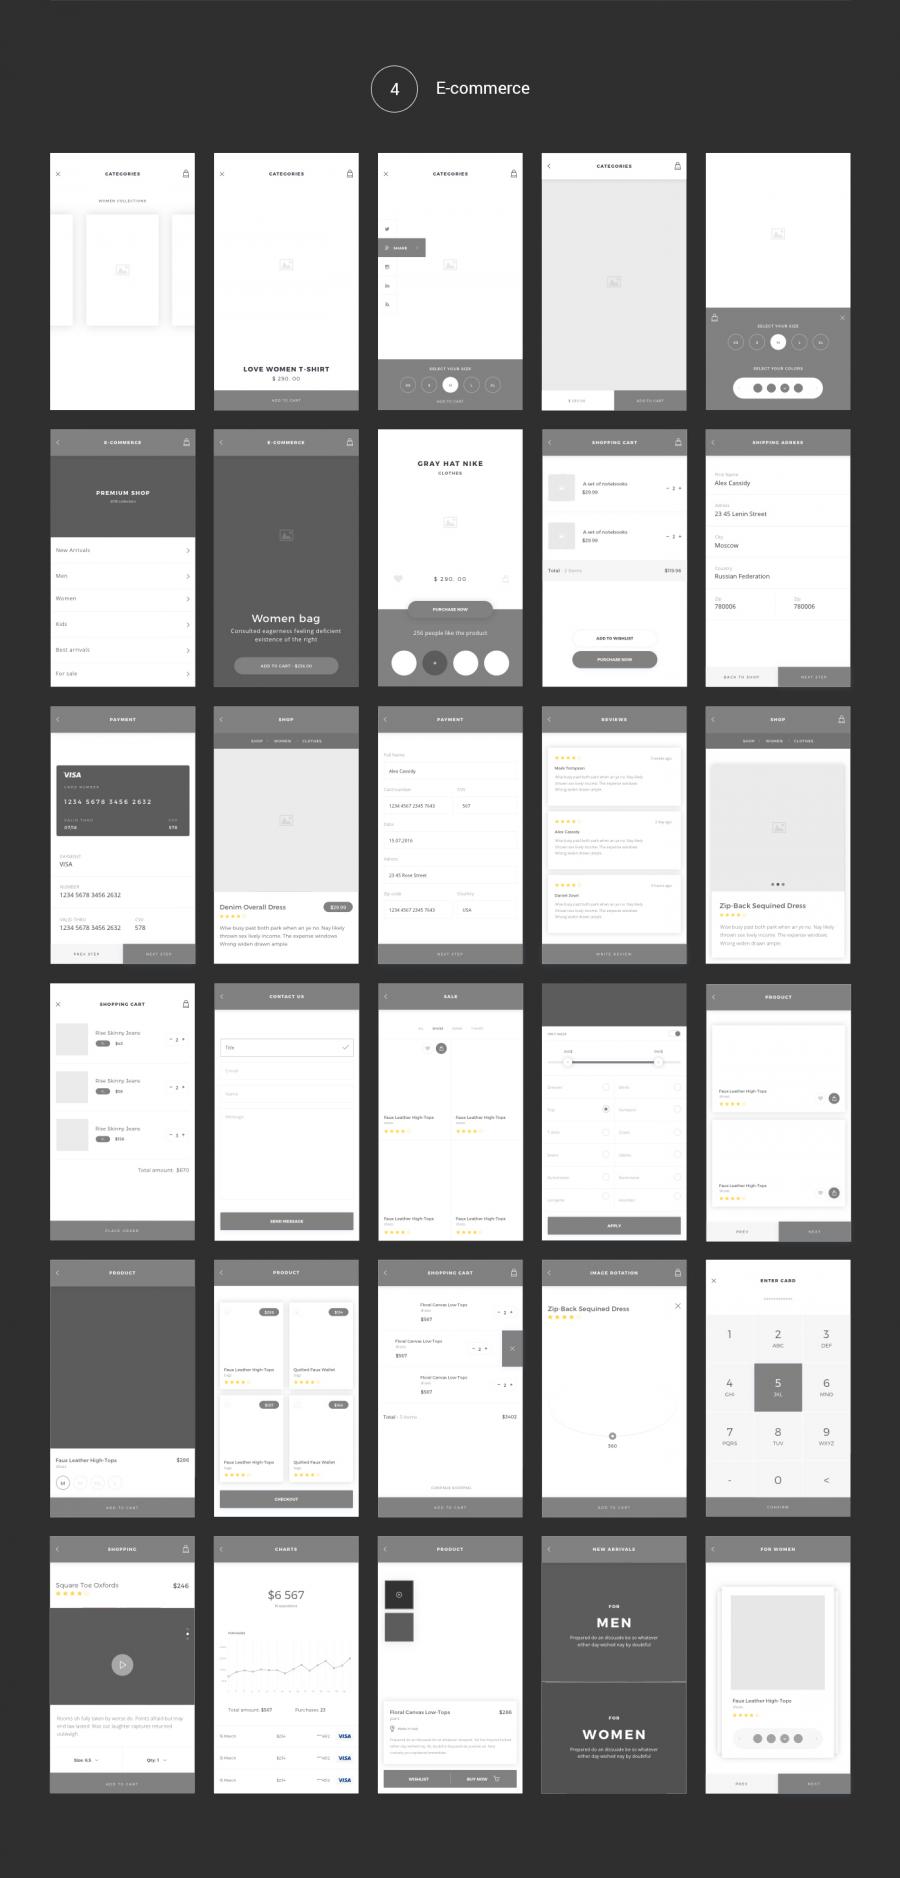 170 APP 界面模板 Knock Mobile UI Kit with Wireframe [PSD&SKETCH]插图(7)